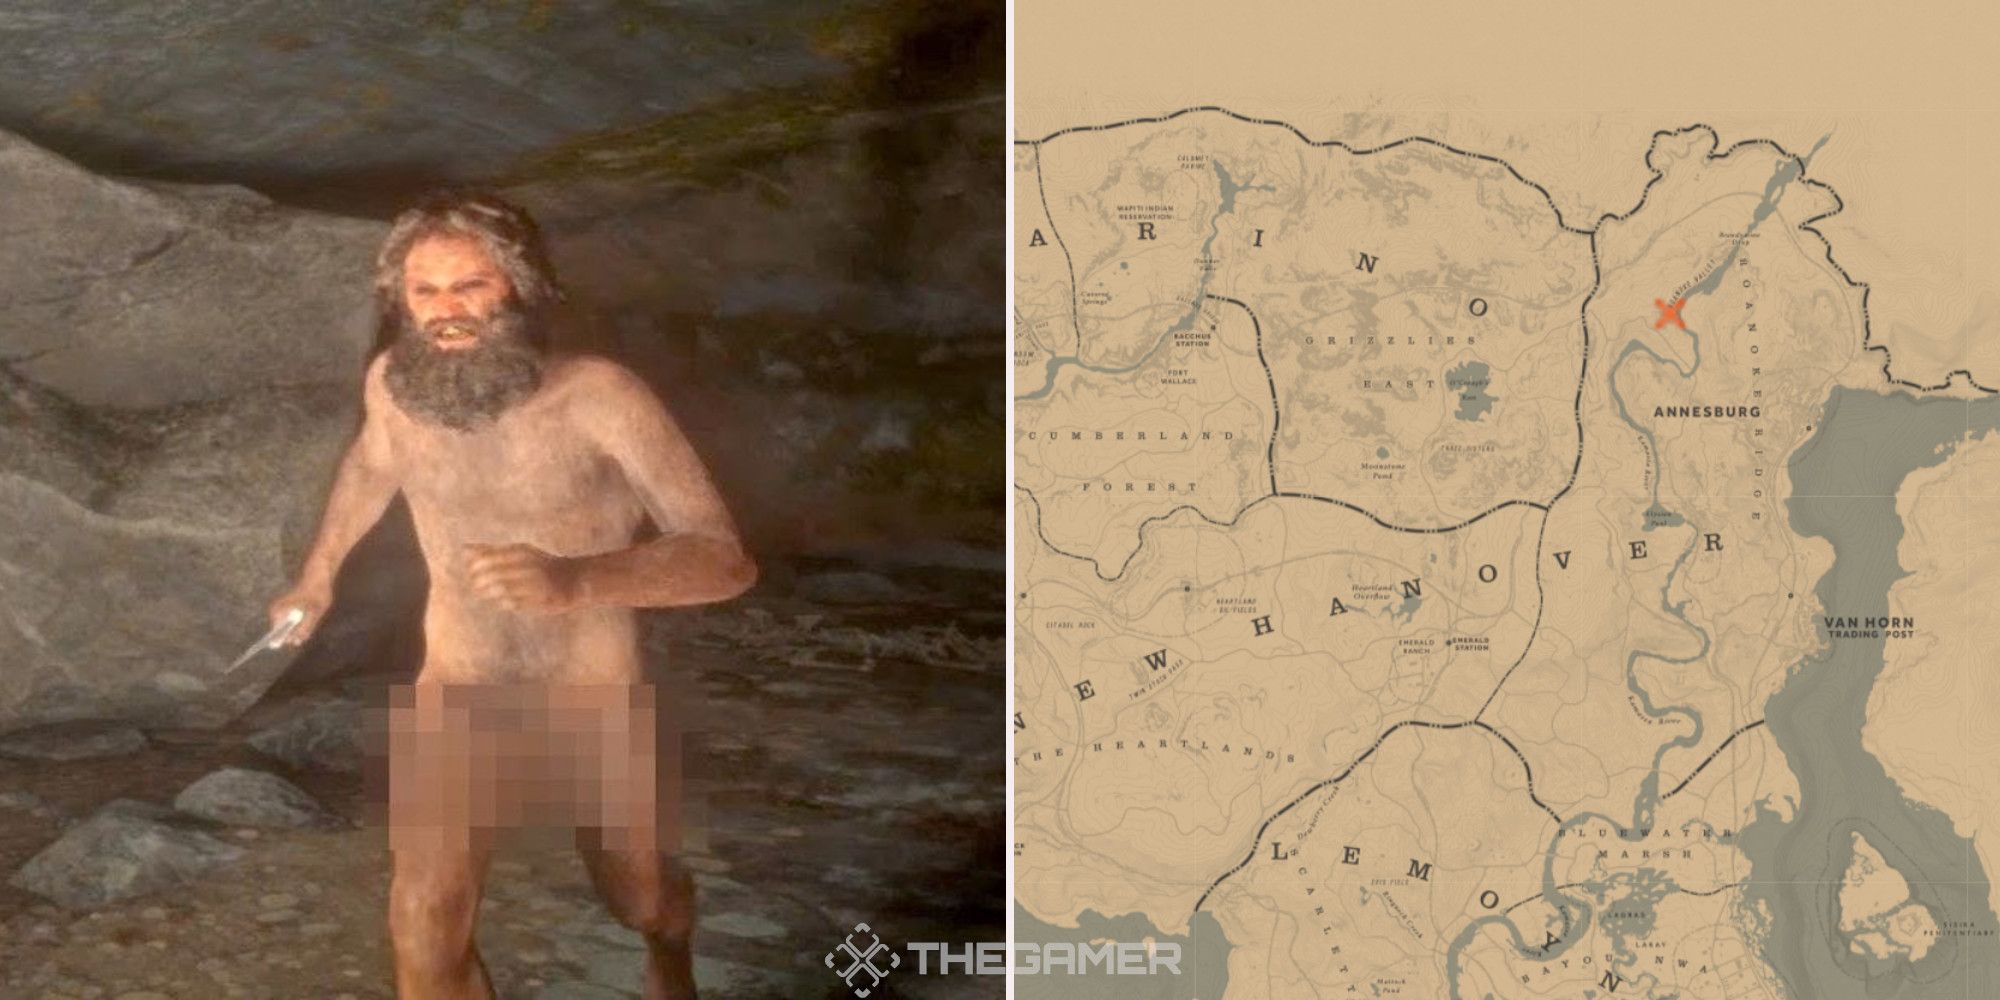 The feral man in Red Dead Redemption 2, next to an image of where he can be found marked on the map.